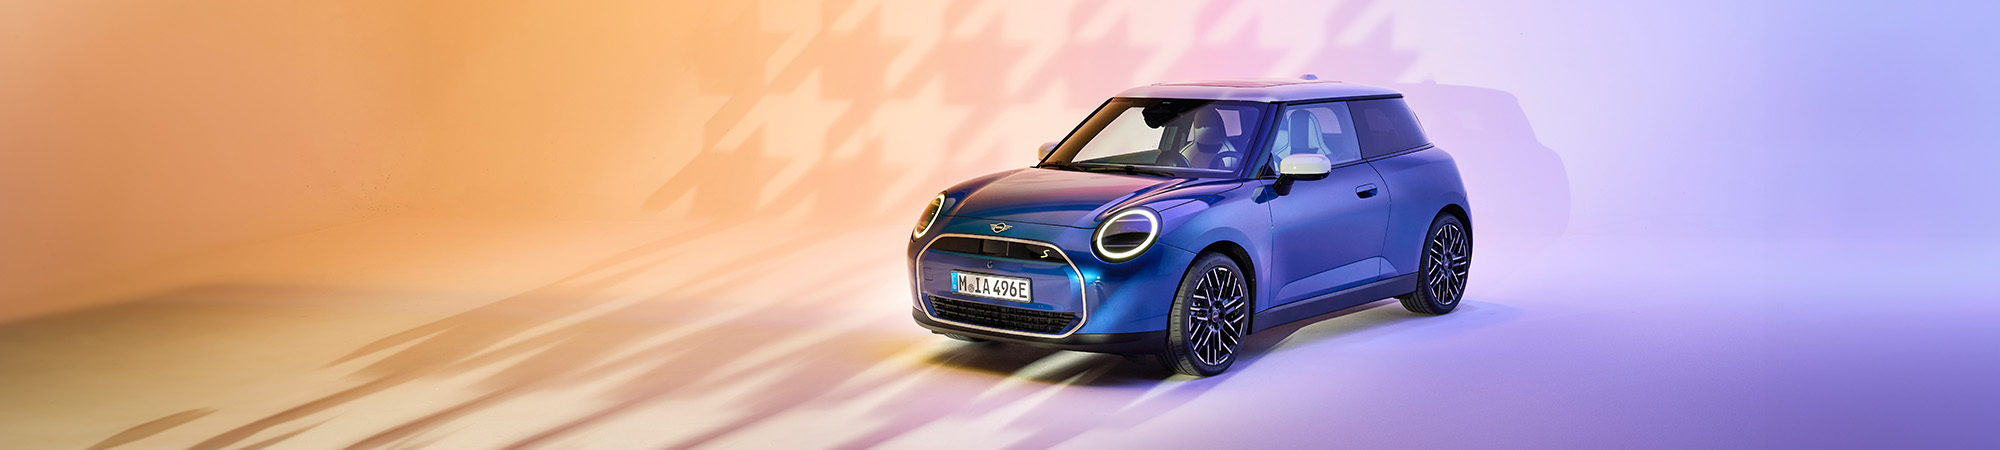 MINI goes all-electric with new MINI Cooper